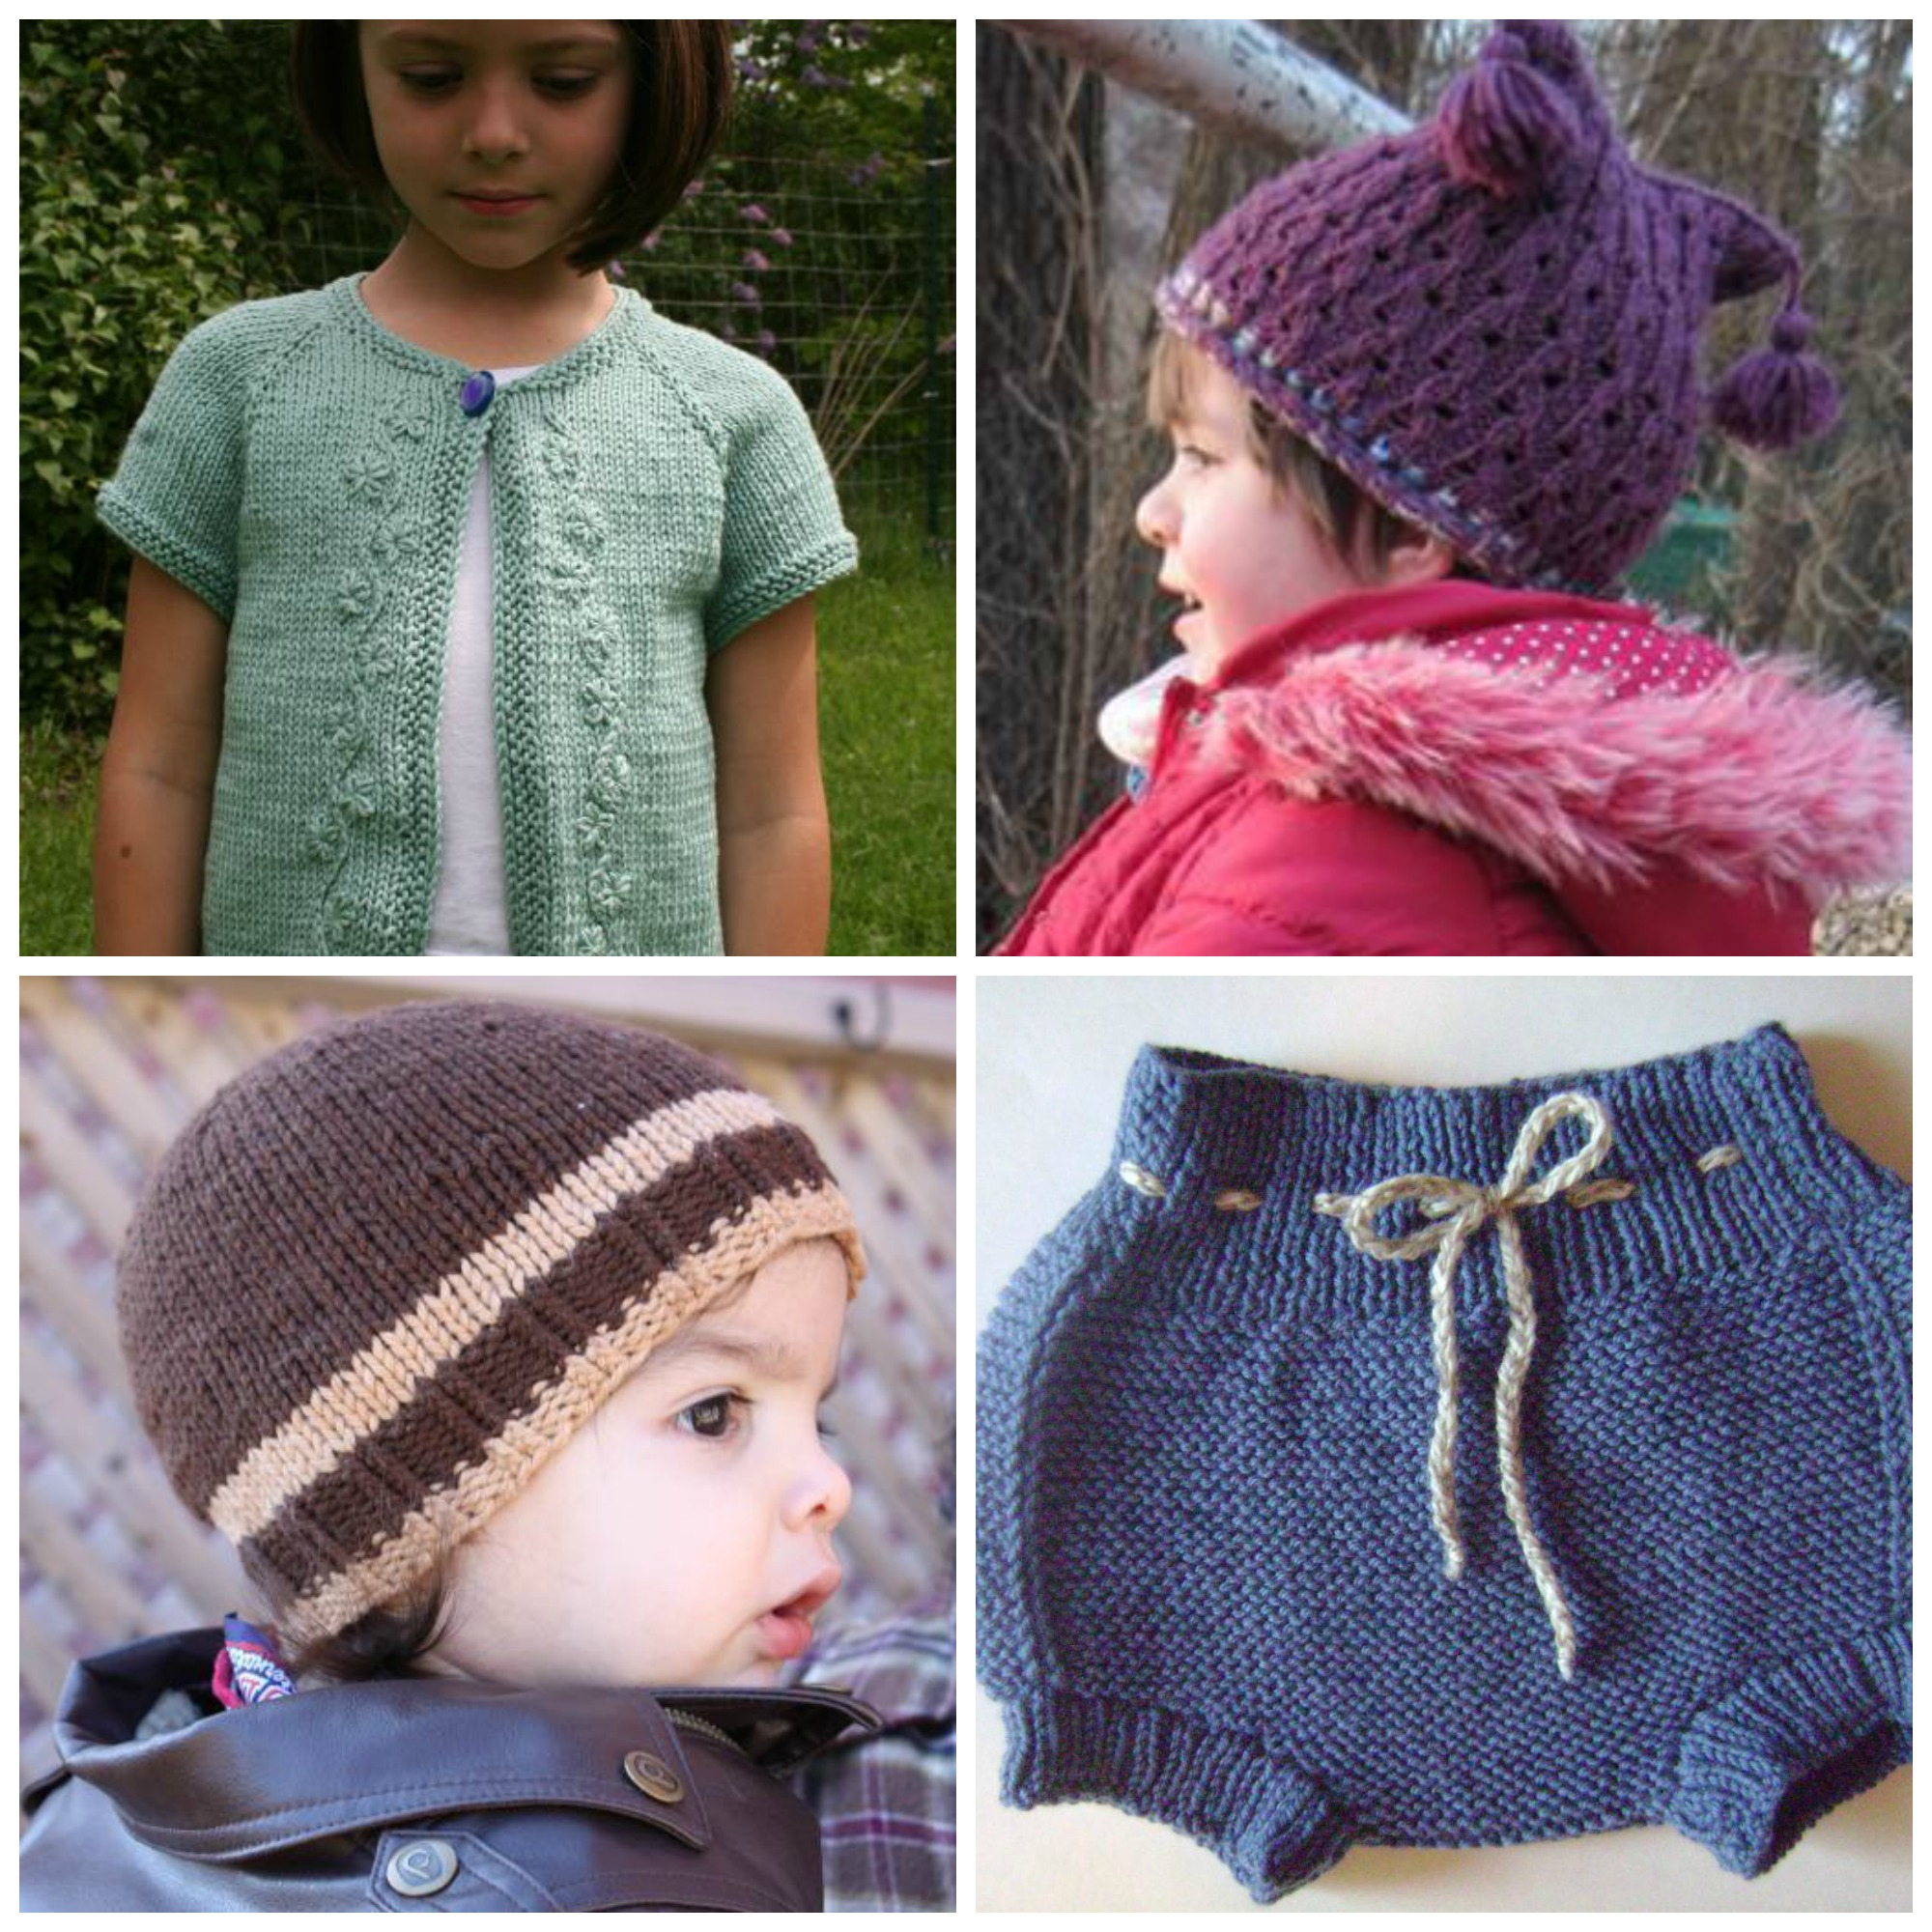 Knitting Patterns Download 5 Free Knitting Pattern Books With Over 25 Free Patterns